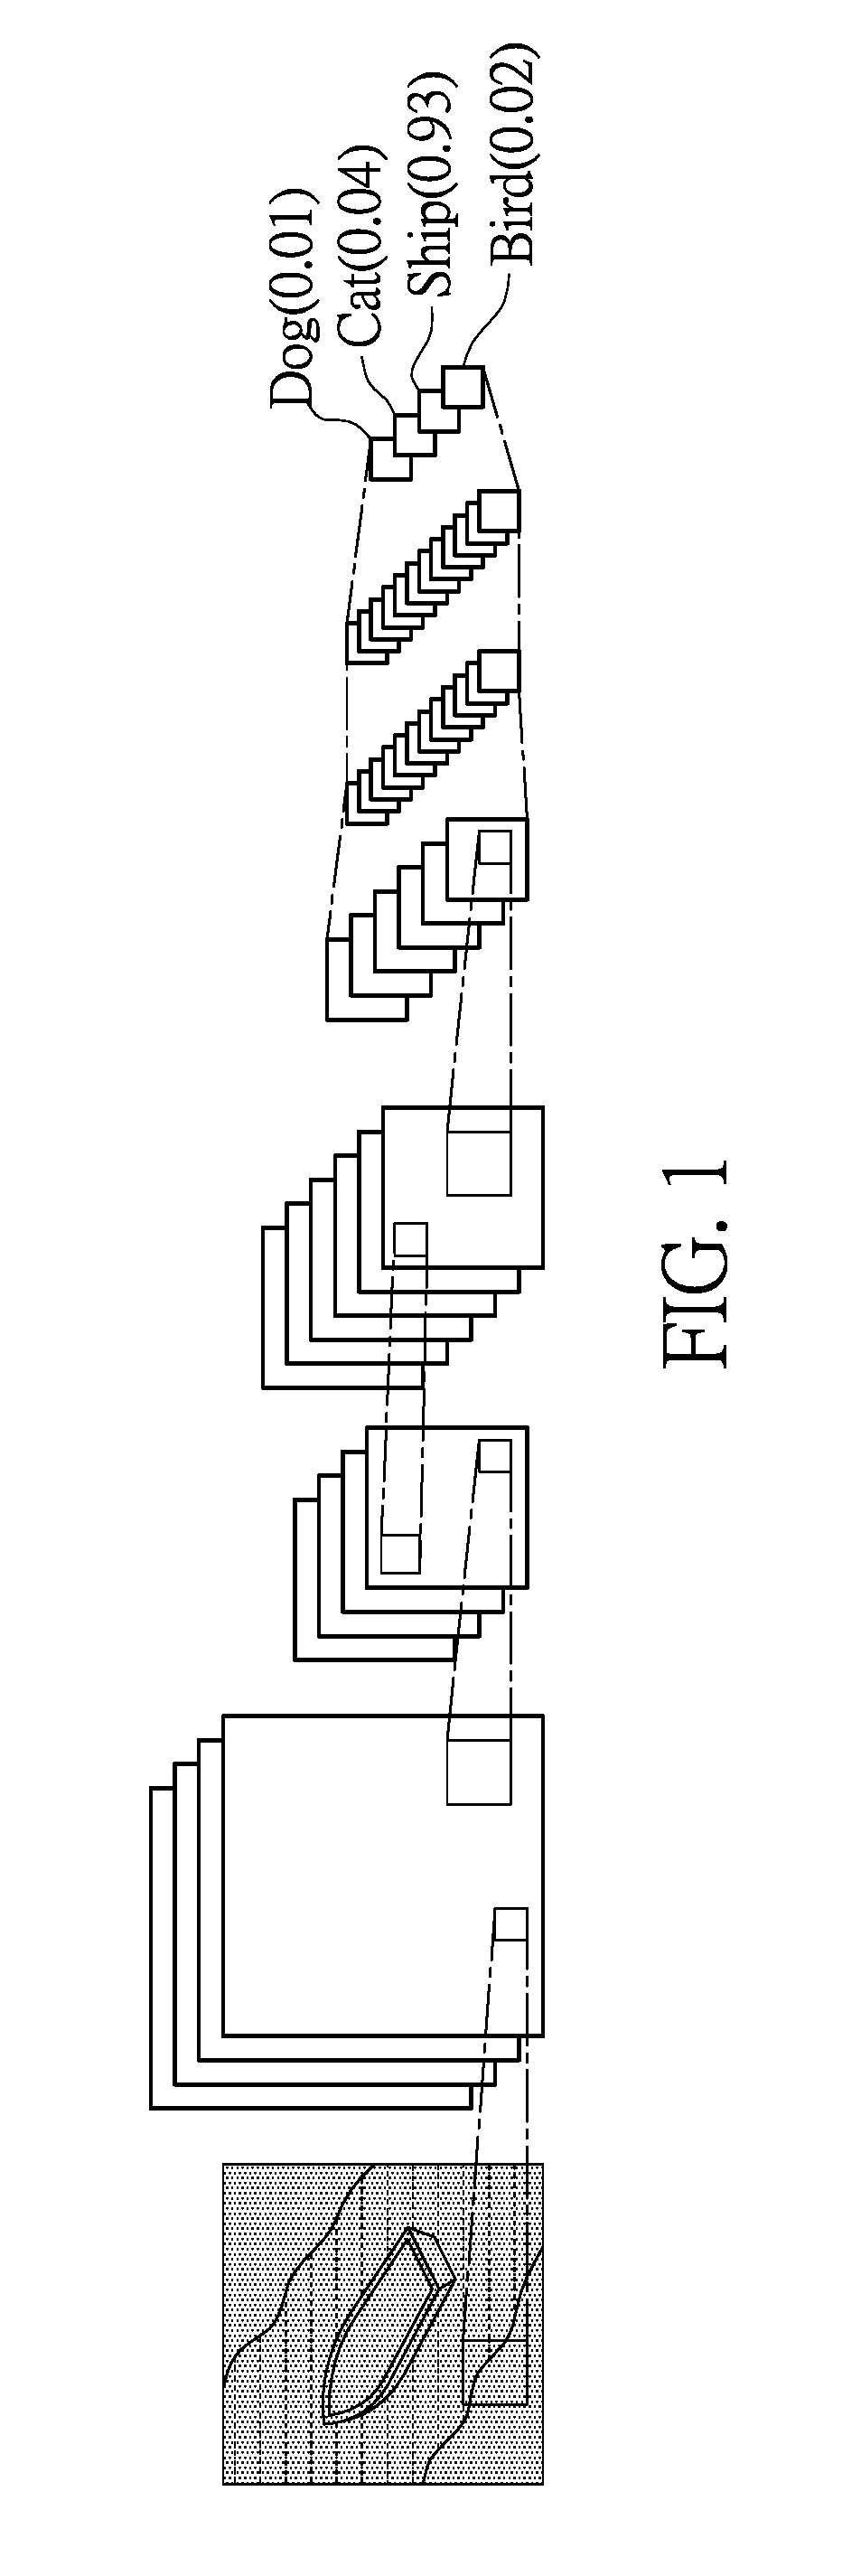 Image recognition method and system based on deep learning